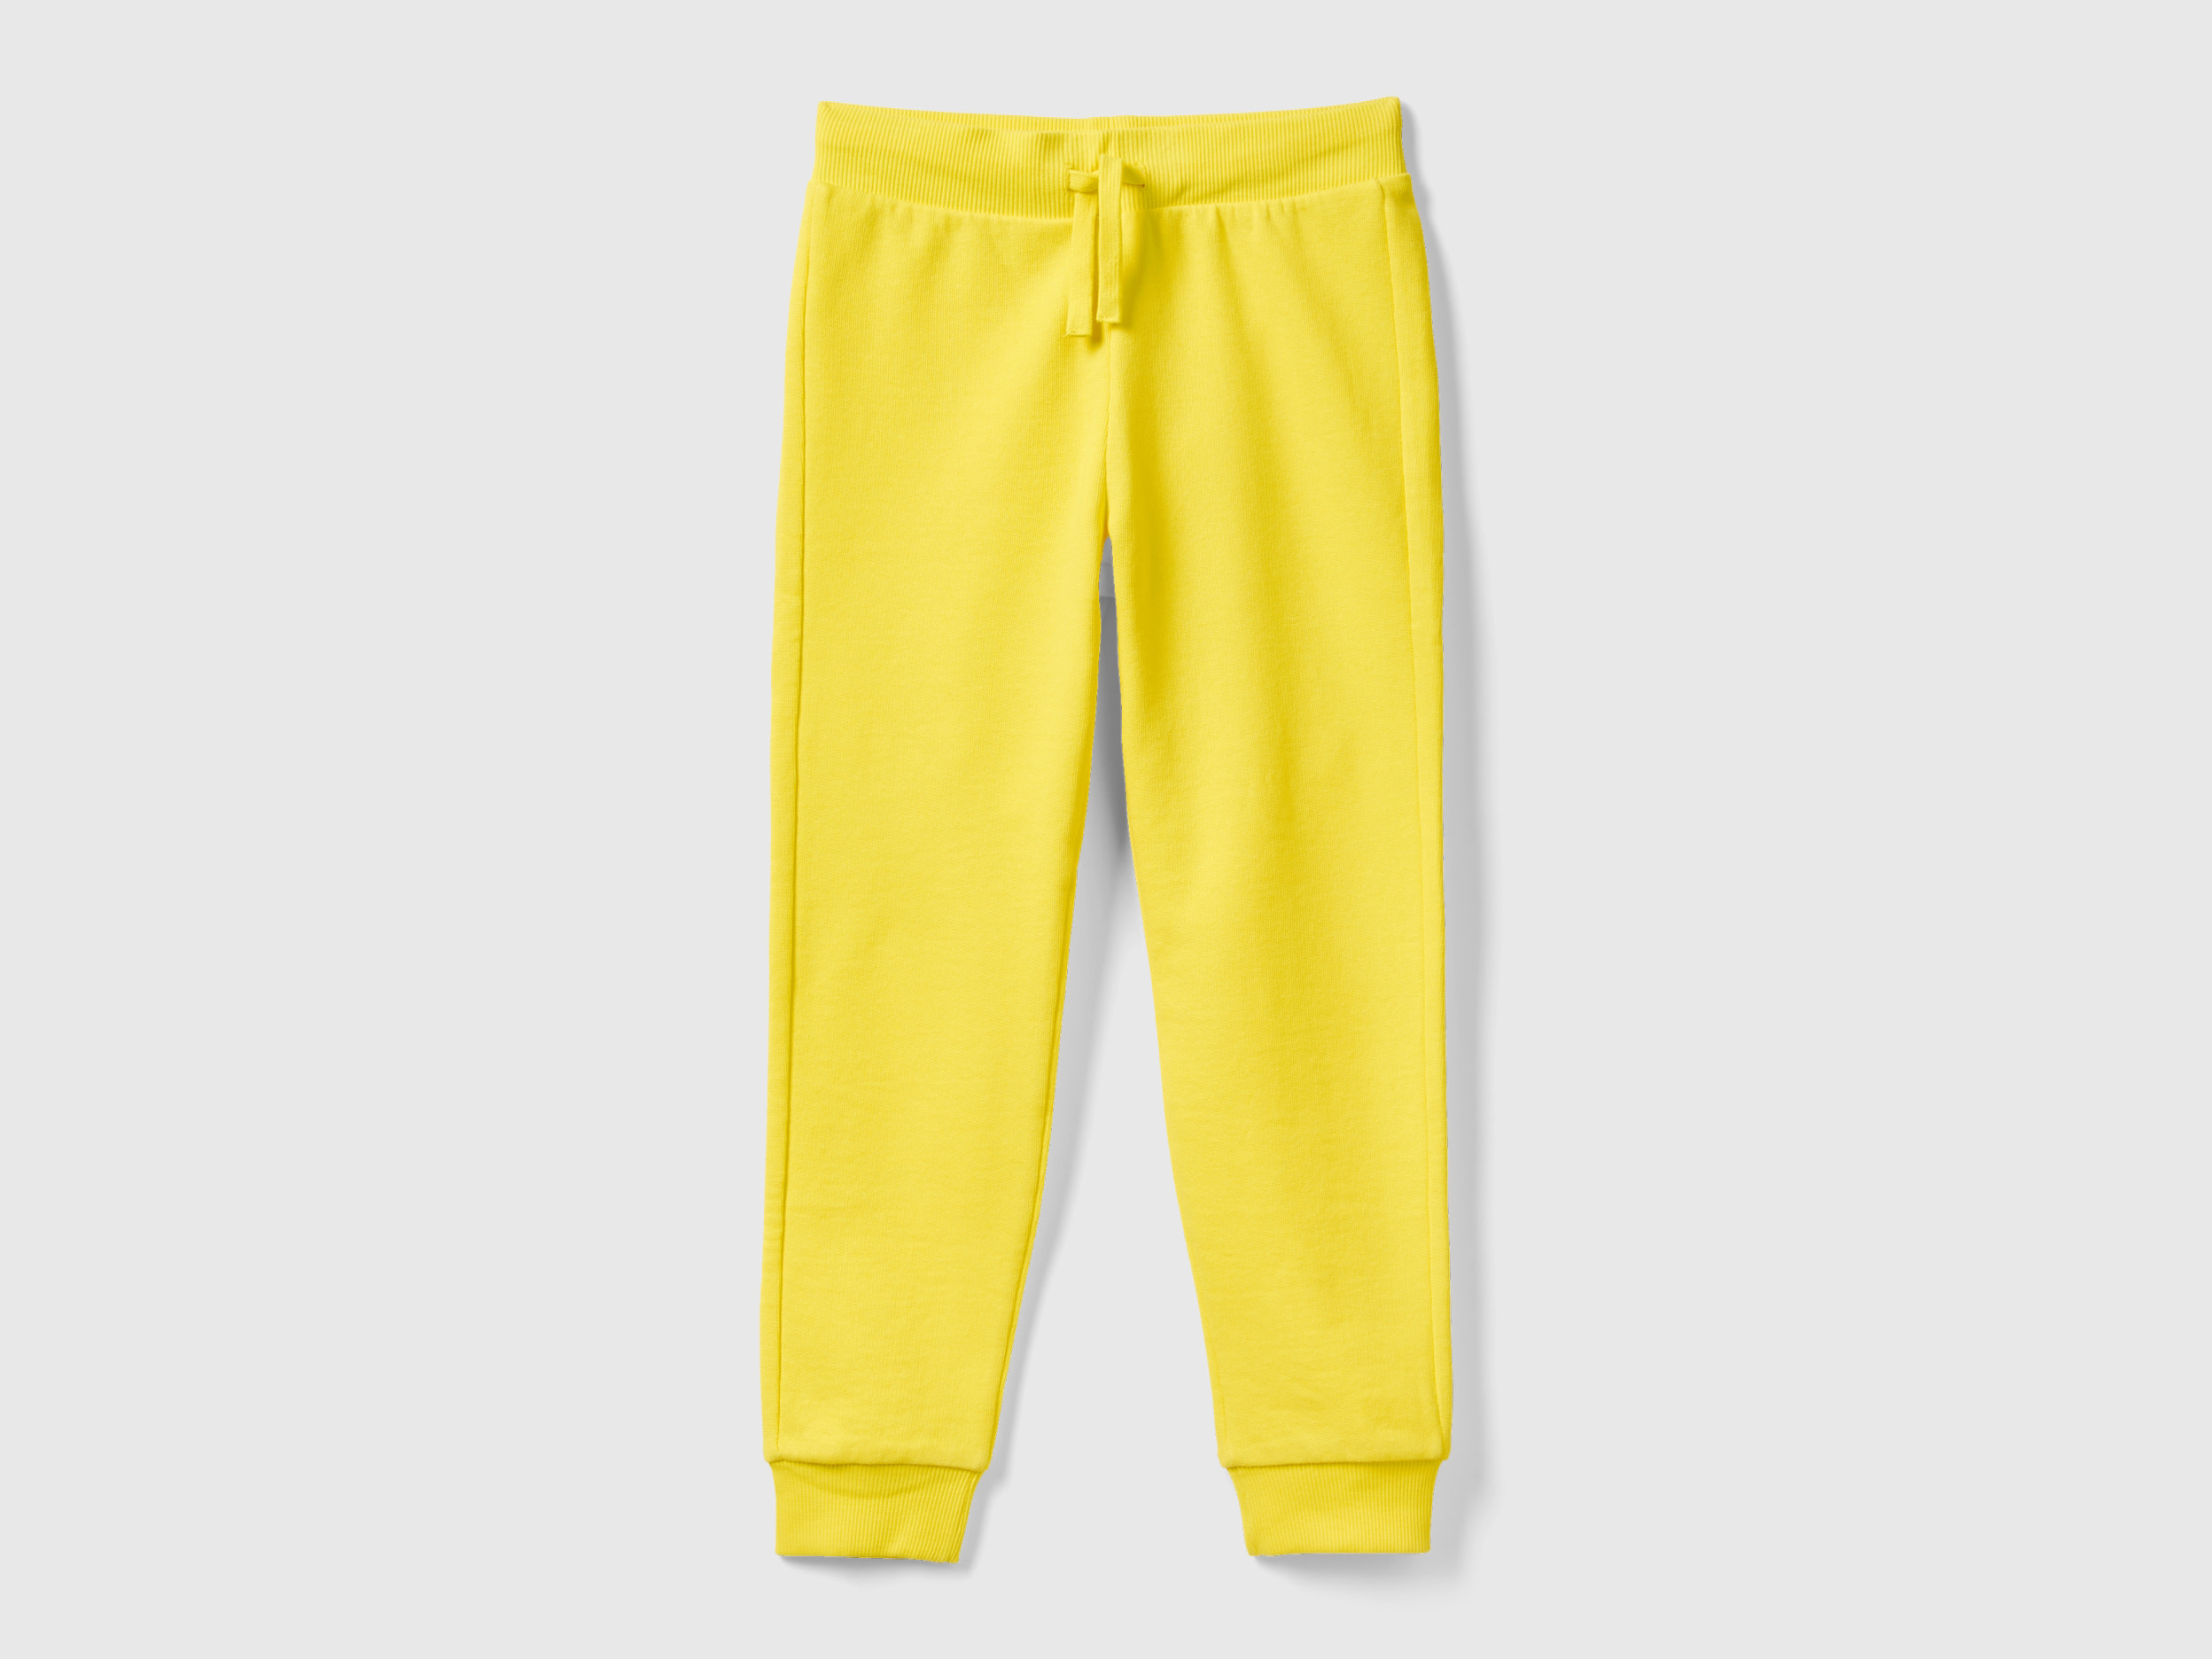 Benetton, Sporty Trousers With Drawstring, size 2XL, Yellow, Kids